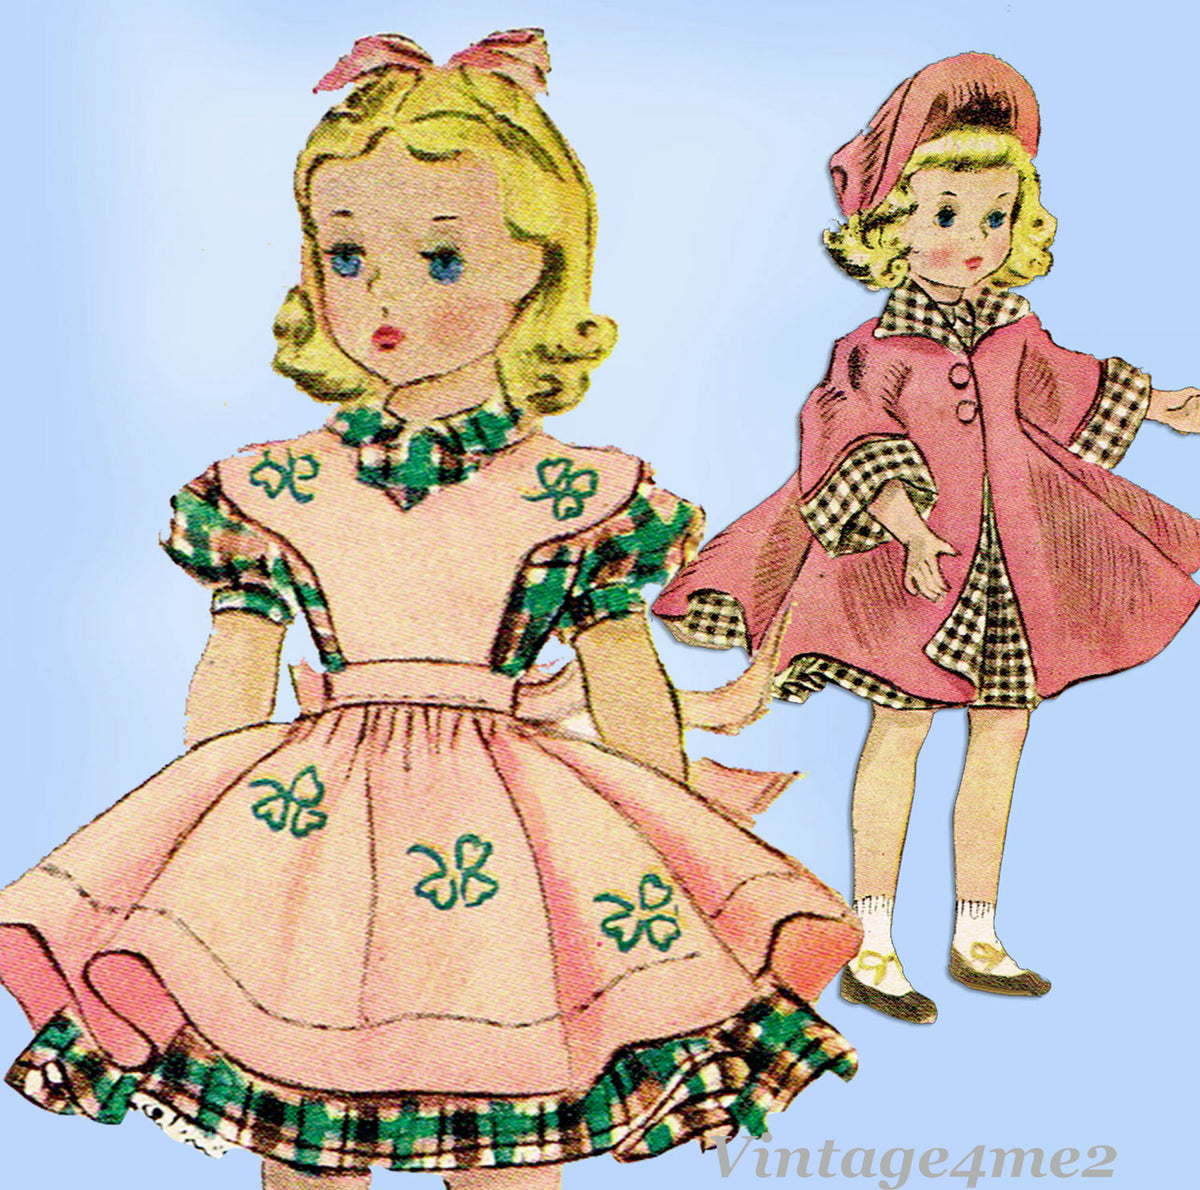 1950's Style 4-Way Wardrobe for 18 Dolls - PDF Sewing Pattern —  MyAngieGirl Doll Clothes and Sewing Patterns